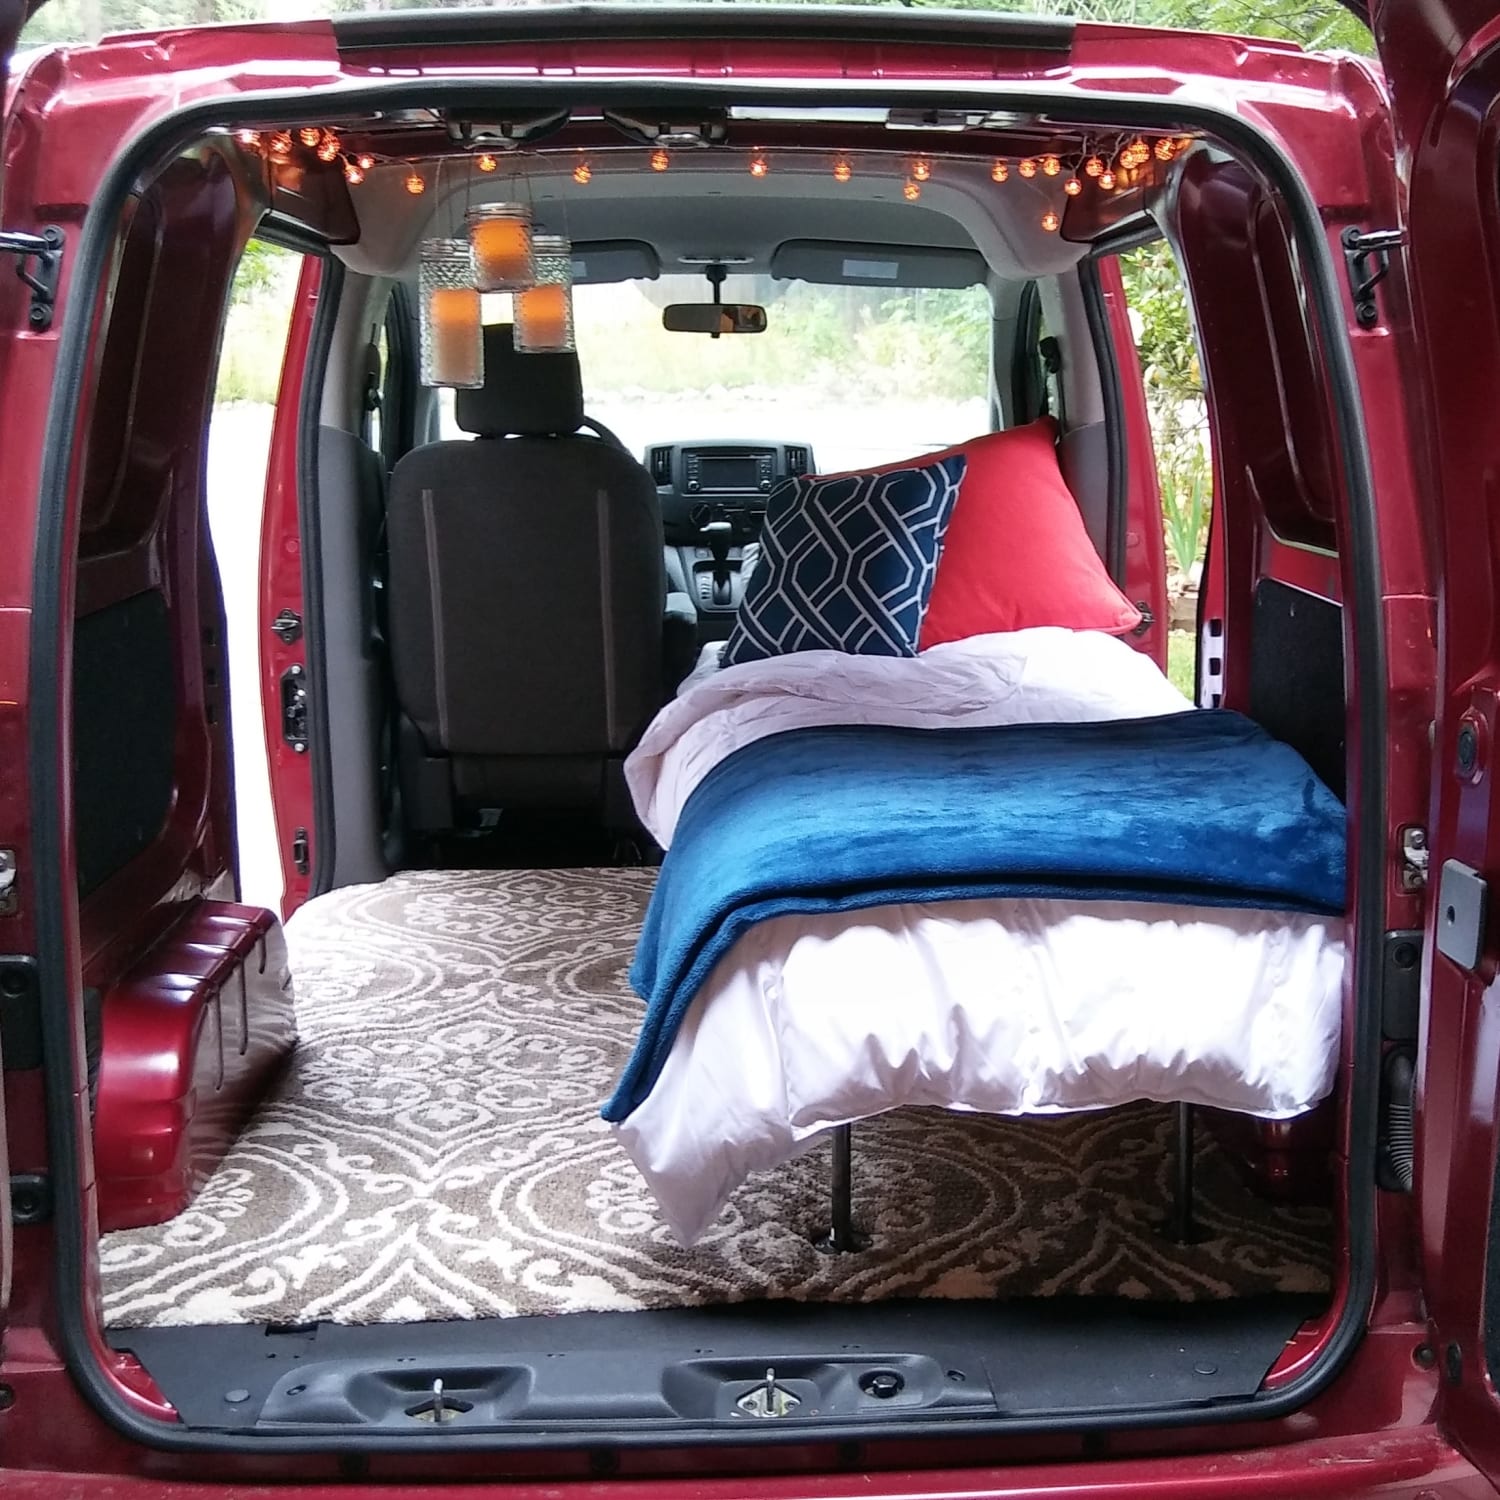 This is my cozy roadtrip van, my home away from home. In it I've camped at fifteen national parks and traveled the entire length of the PCH from Seattle to the Mexican border.